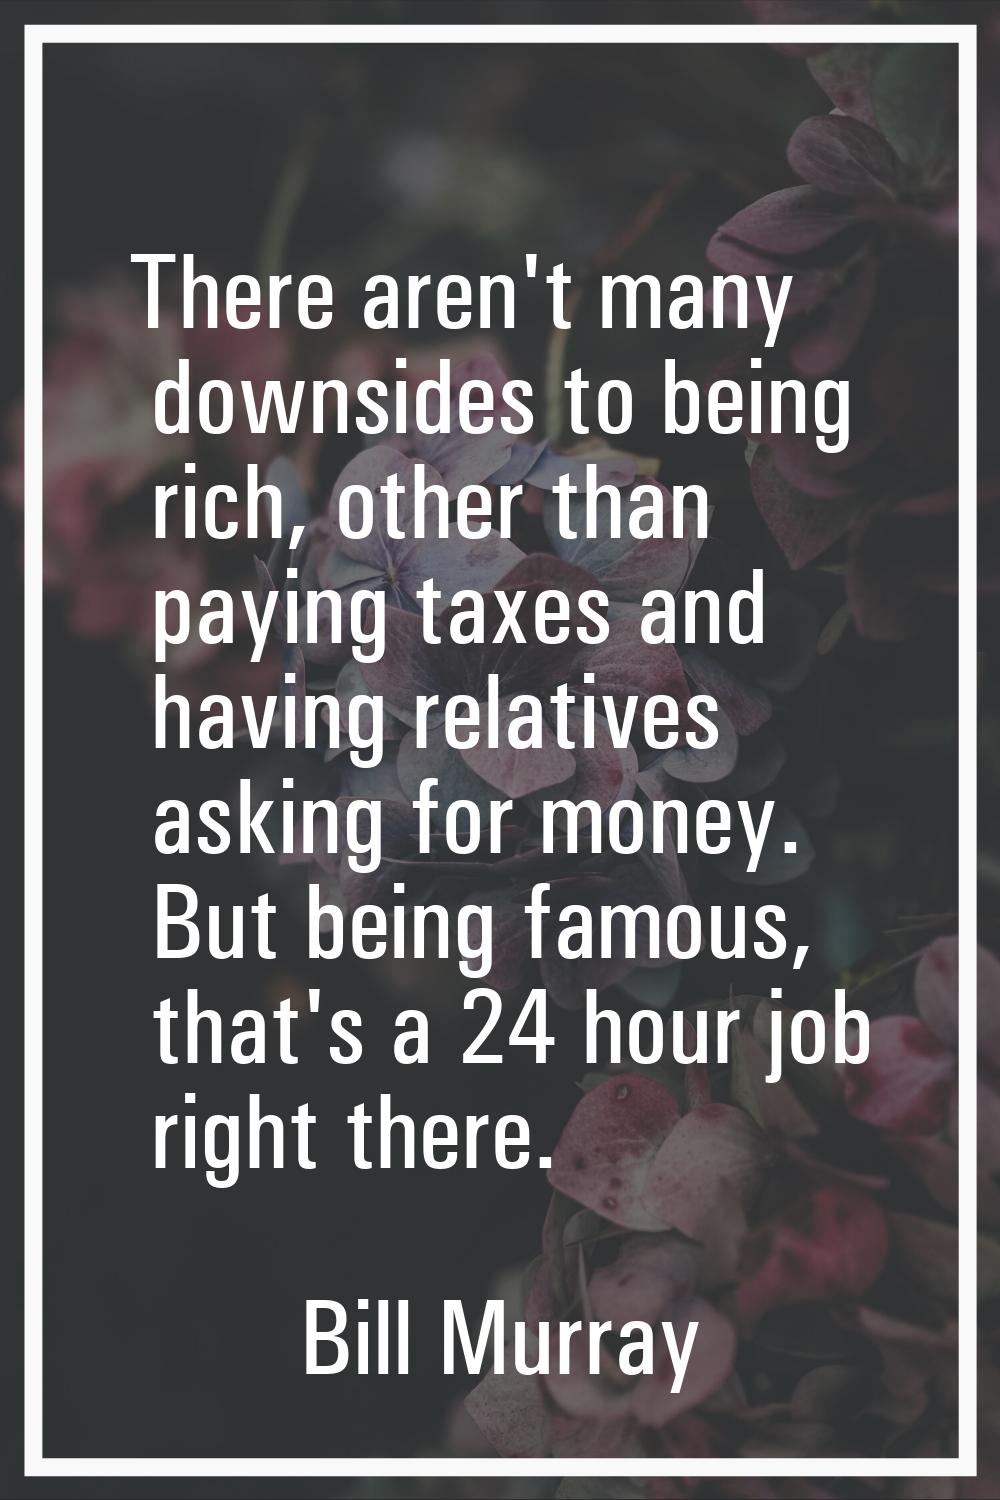 There aren't many downsides to being rich, other than paying taxes and having relatives asking for 